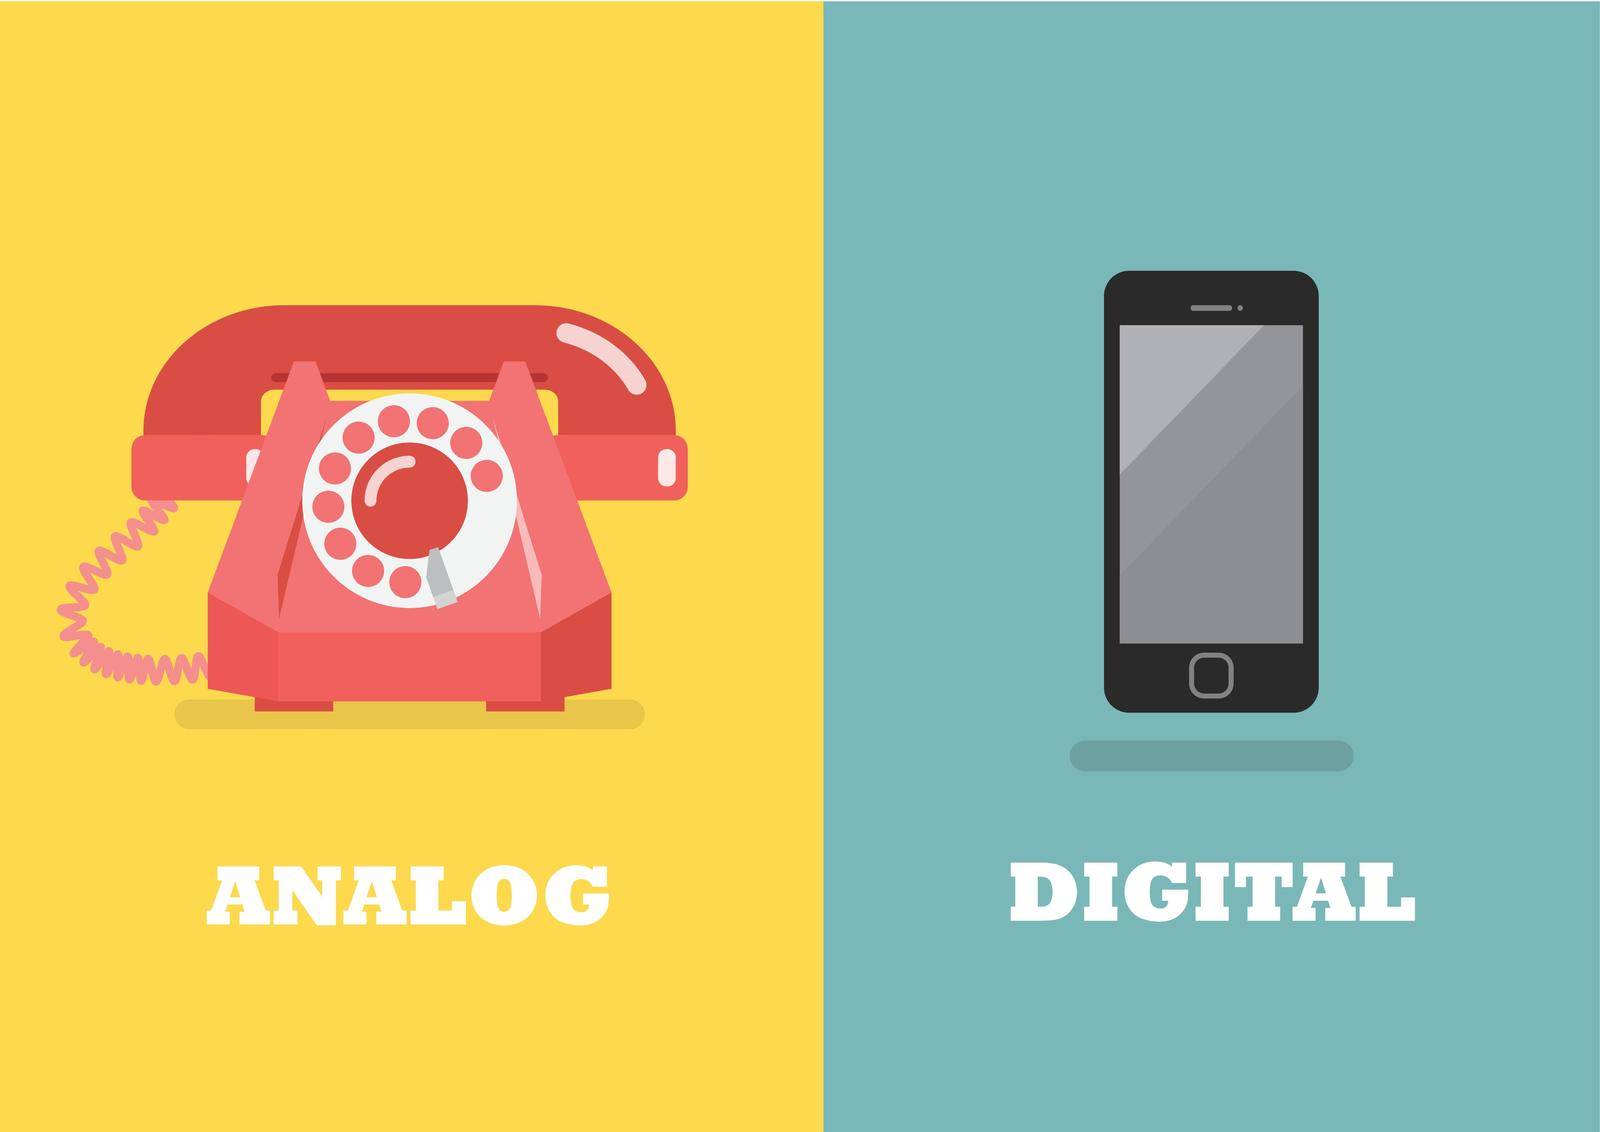 Retro phone in Analog Age and modern phone in Digital Age by siraanamwong